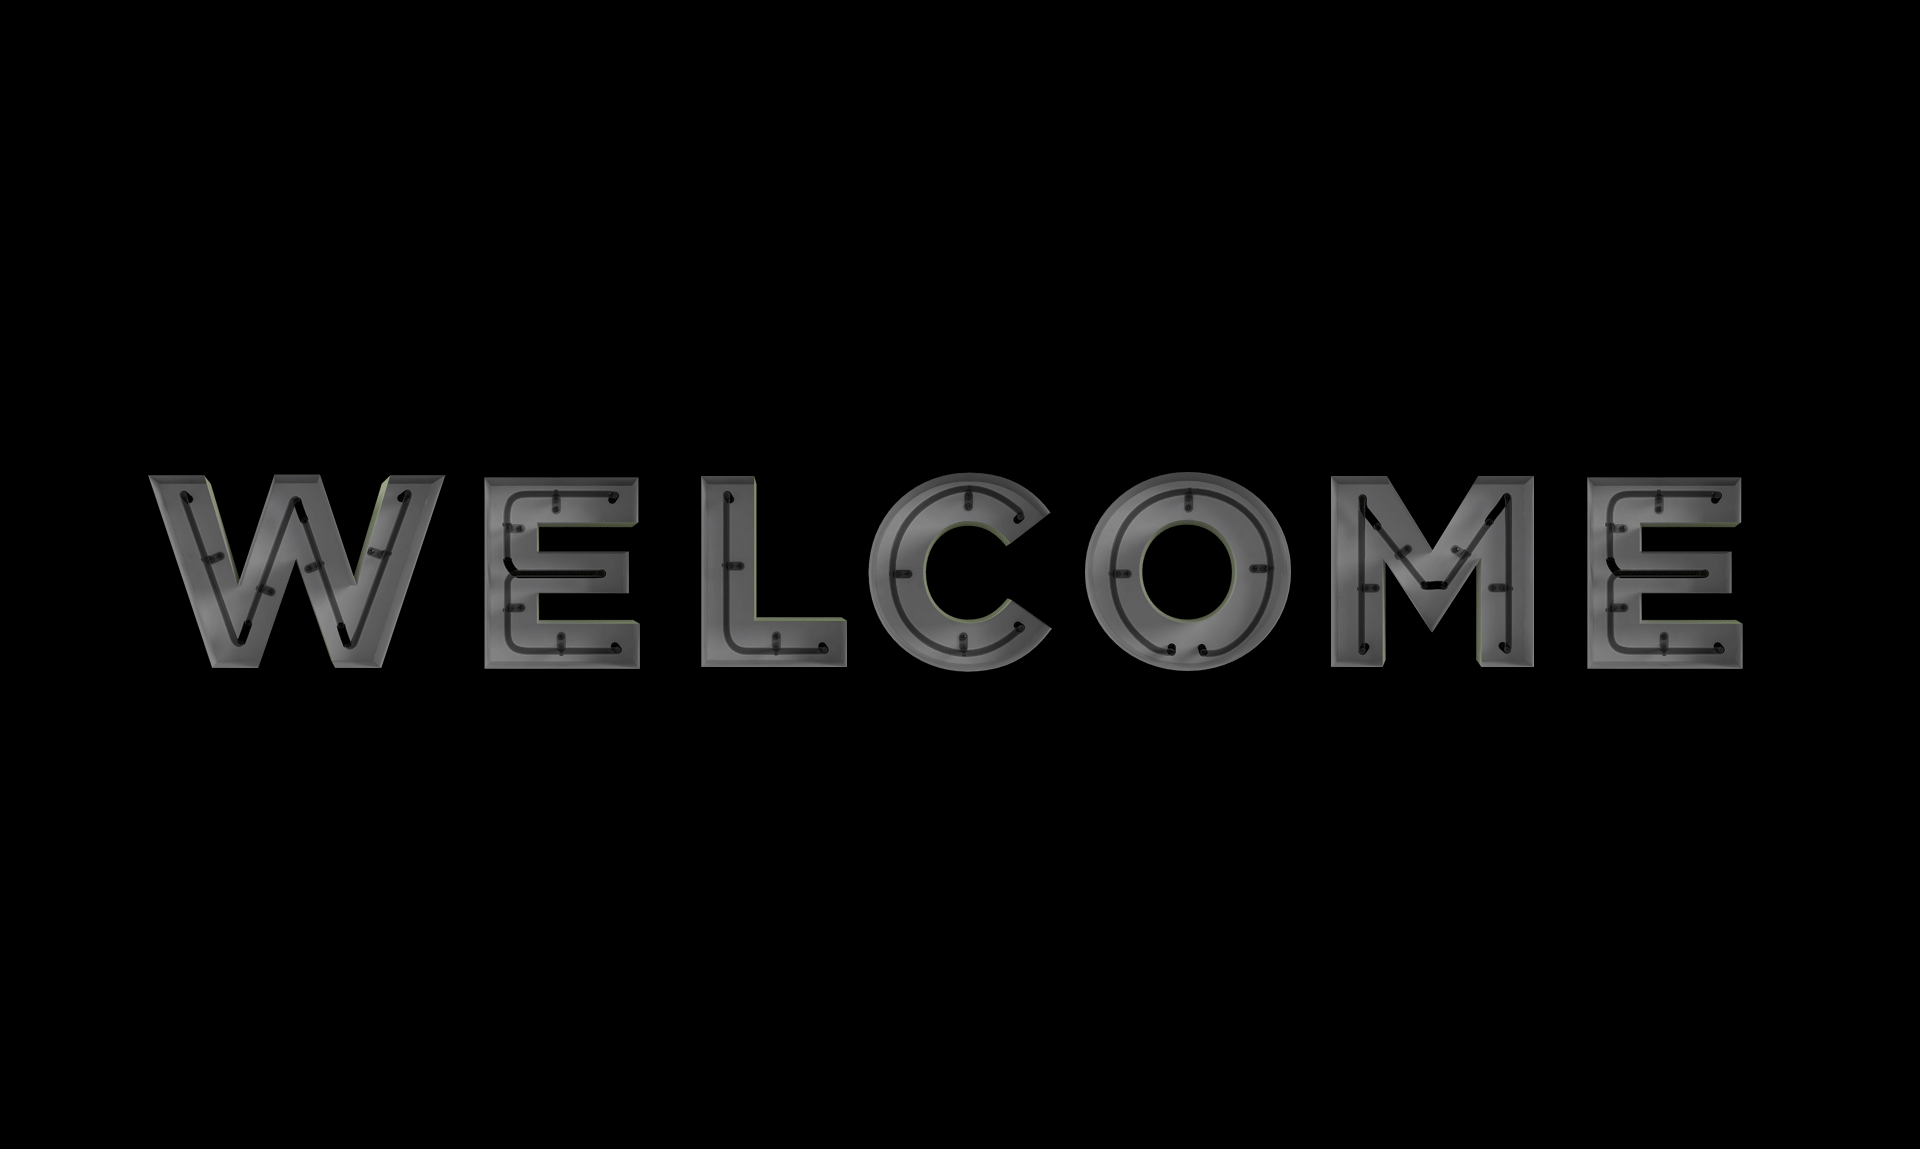 Welcome is steam фото 9